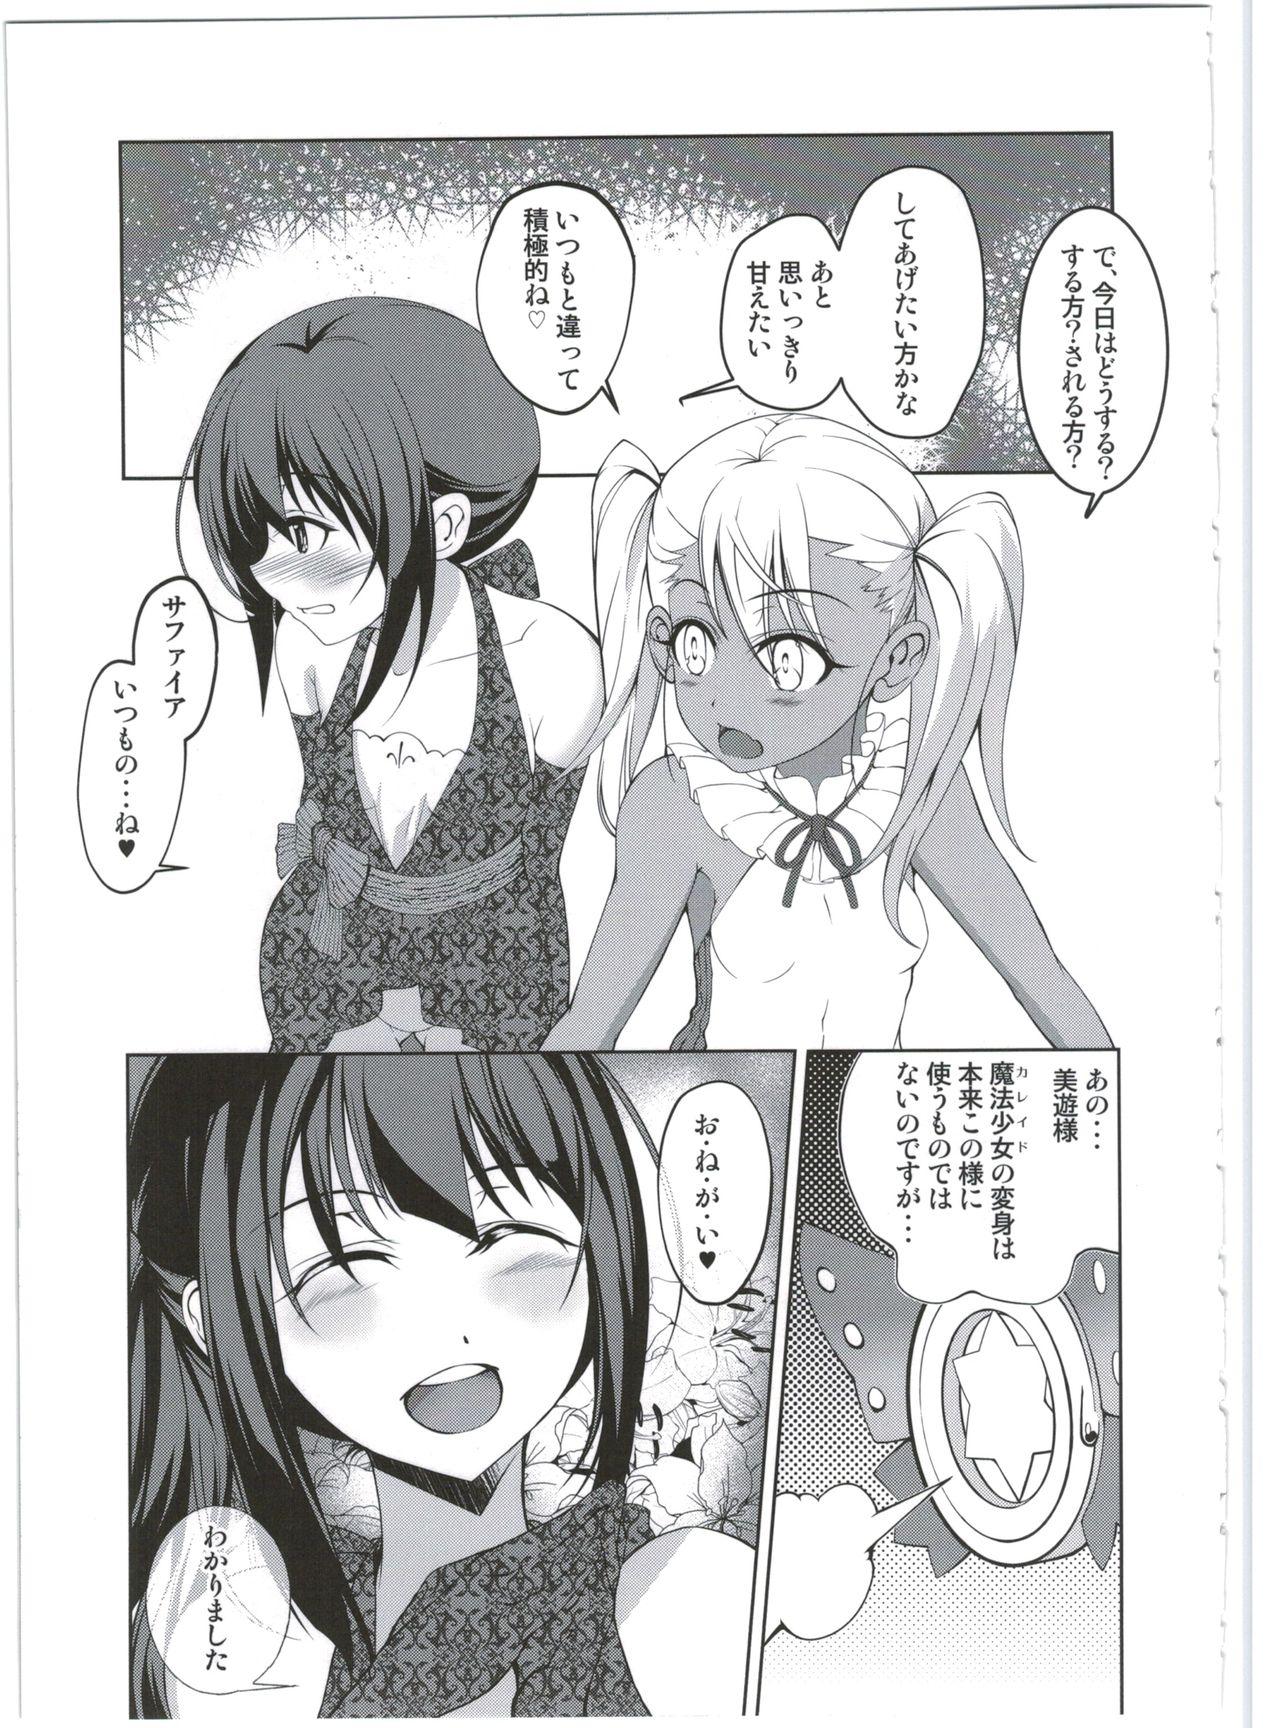 Reversecowgirl SHG:03 - Fate kaleid liner prisma illya Rimming - Page 11